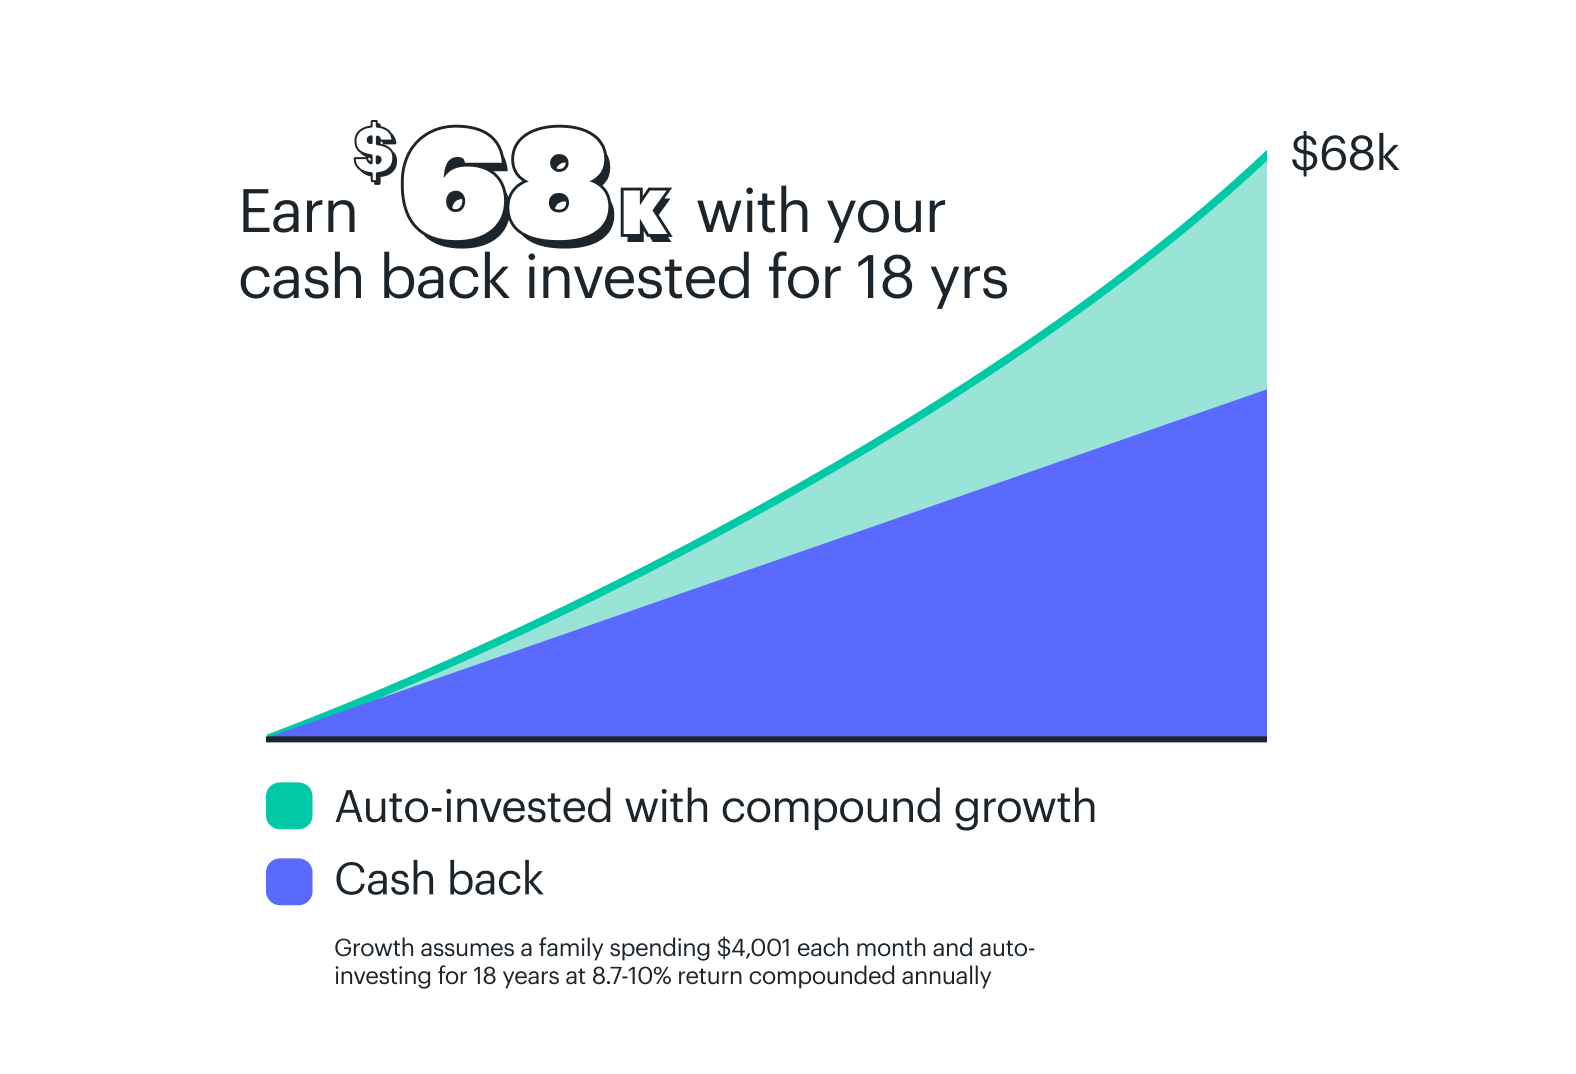 Earn $68k with your cash back invested for 18 years